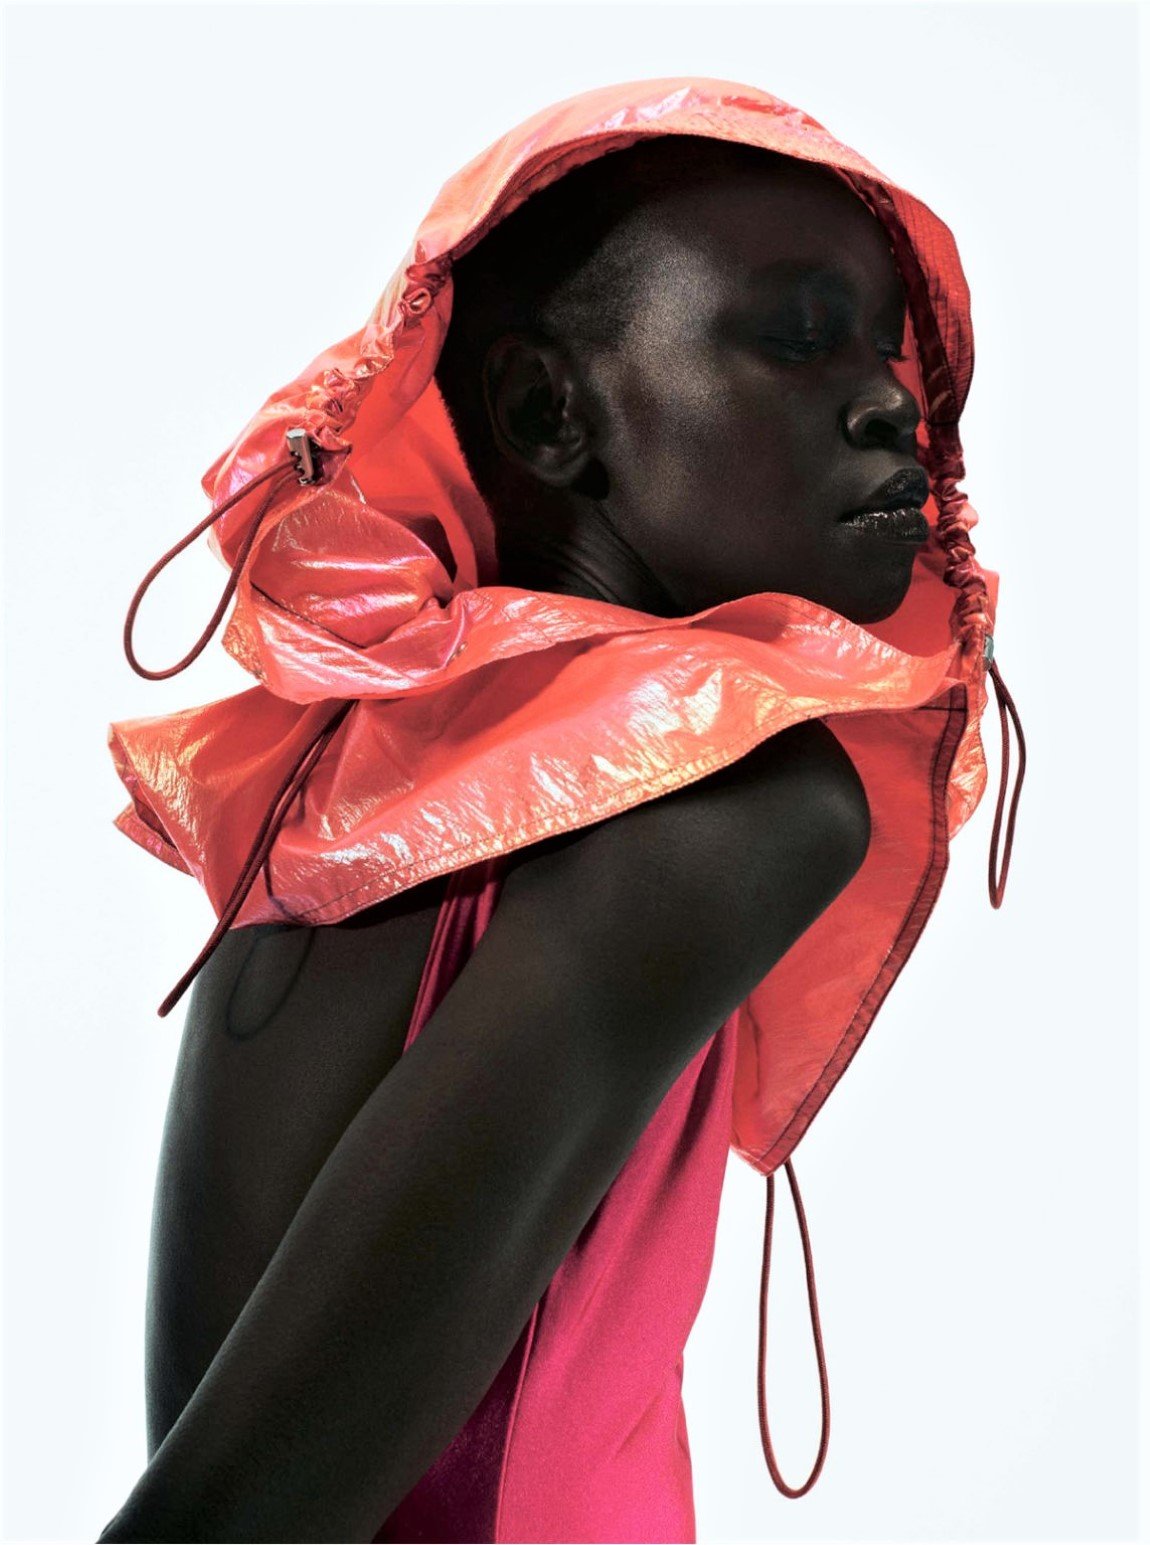 Alek Wek Delivers 'Colour Pop' Joy in The Sunday Times Style by Paola Kudacki — Anne of